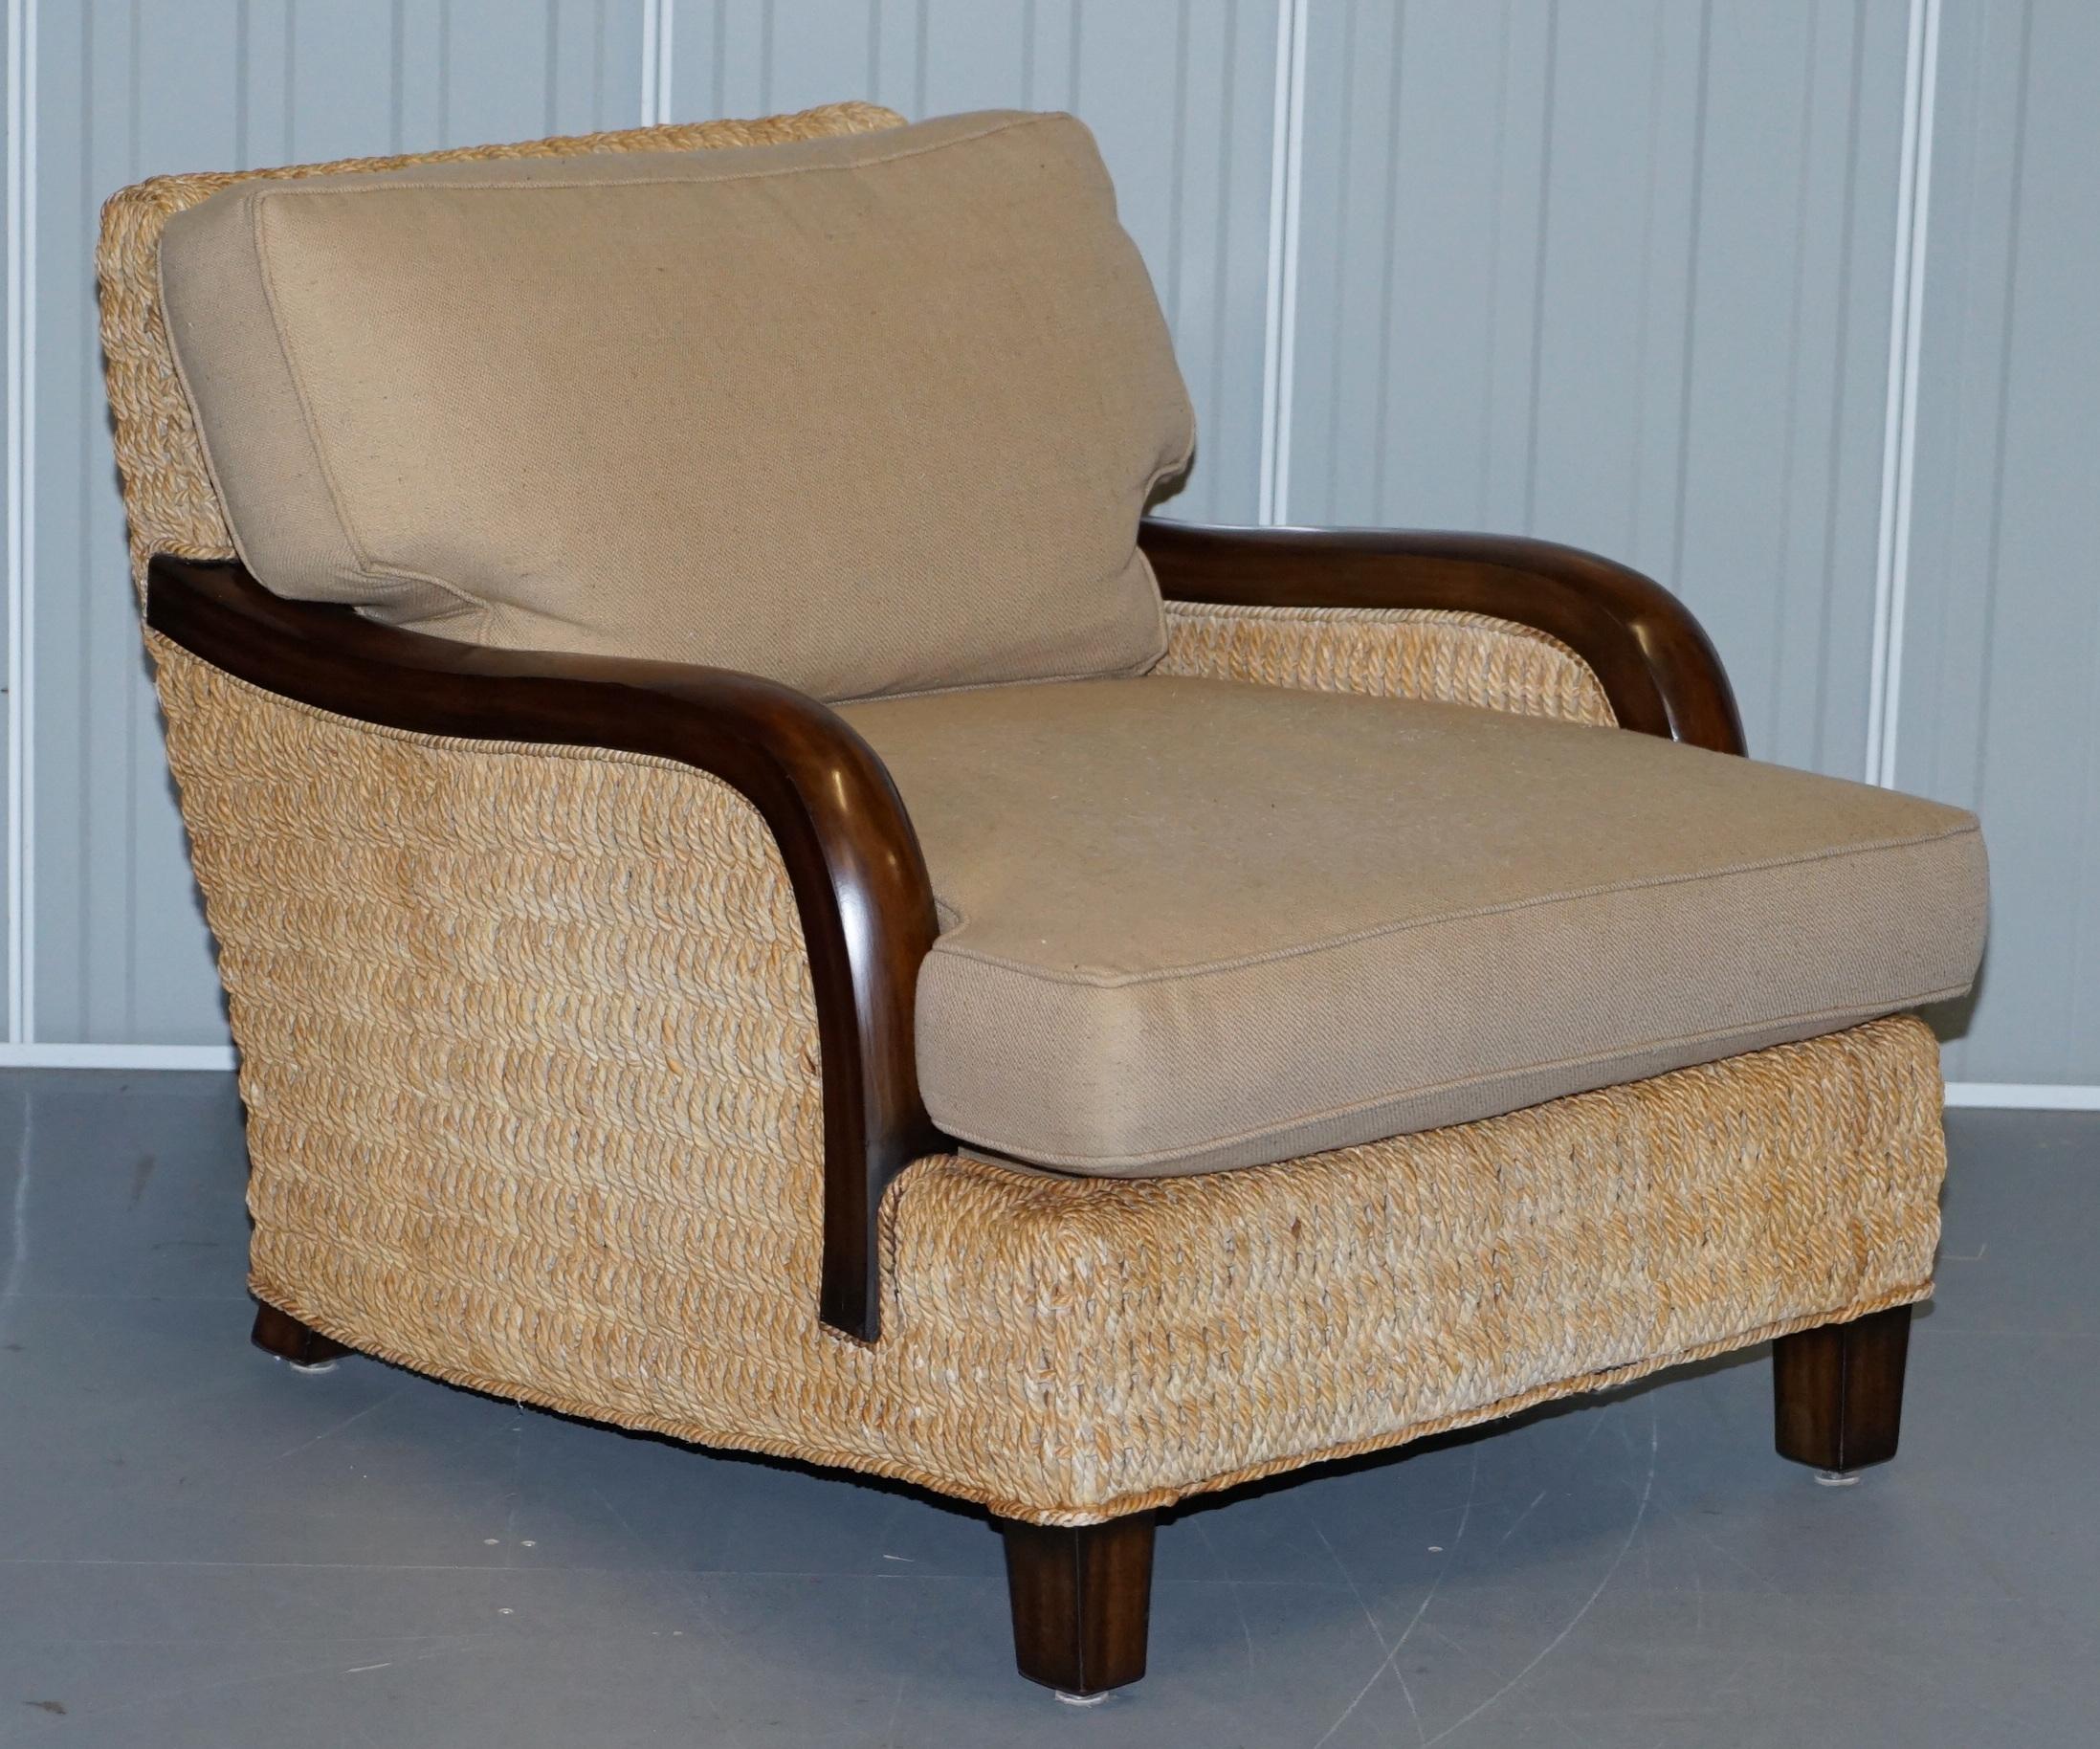 We are delighted to offer for sale this pair of absolutely stunning Ralph Lauren oversized Barrymore armchairs with heavy wicker frames RRP £11,000

A truly stunning pair, absolutely the most comfortable lounge chairs I have sat in this year,